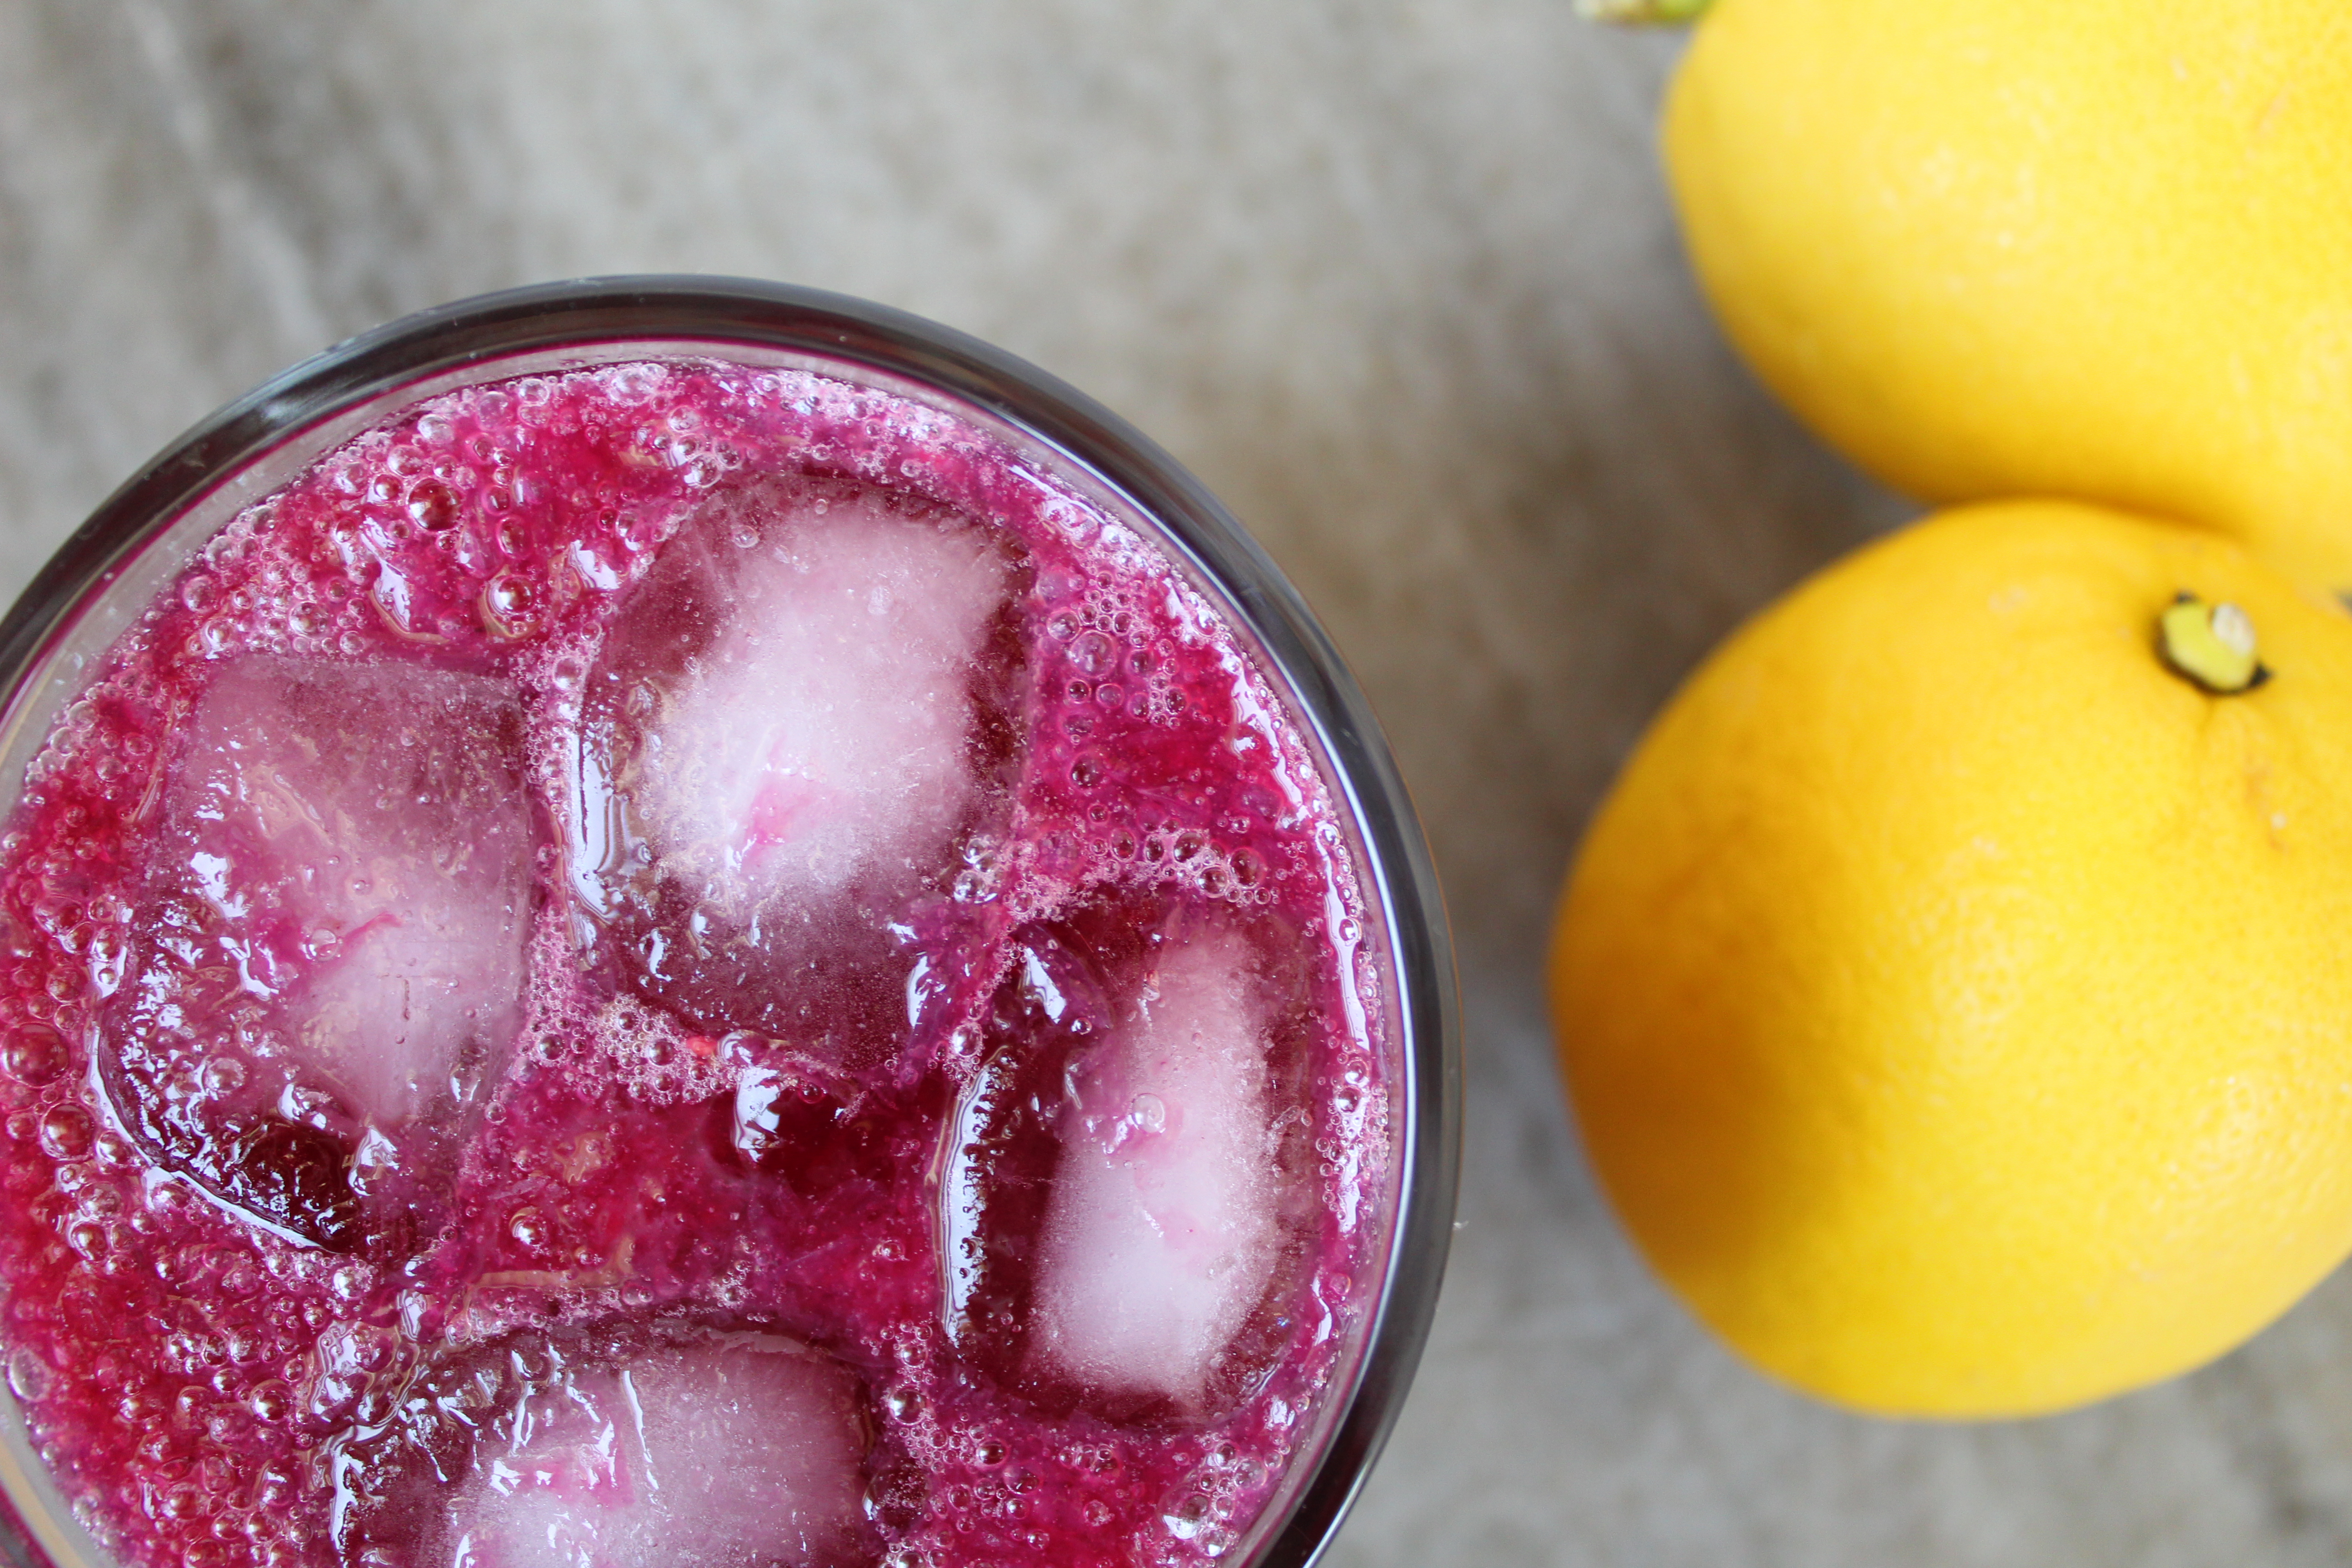 This sparkling blueberry lemonade recipe provides a fresh, easy, nonalcoholic spring or summer drink to serve as the weather warms up!